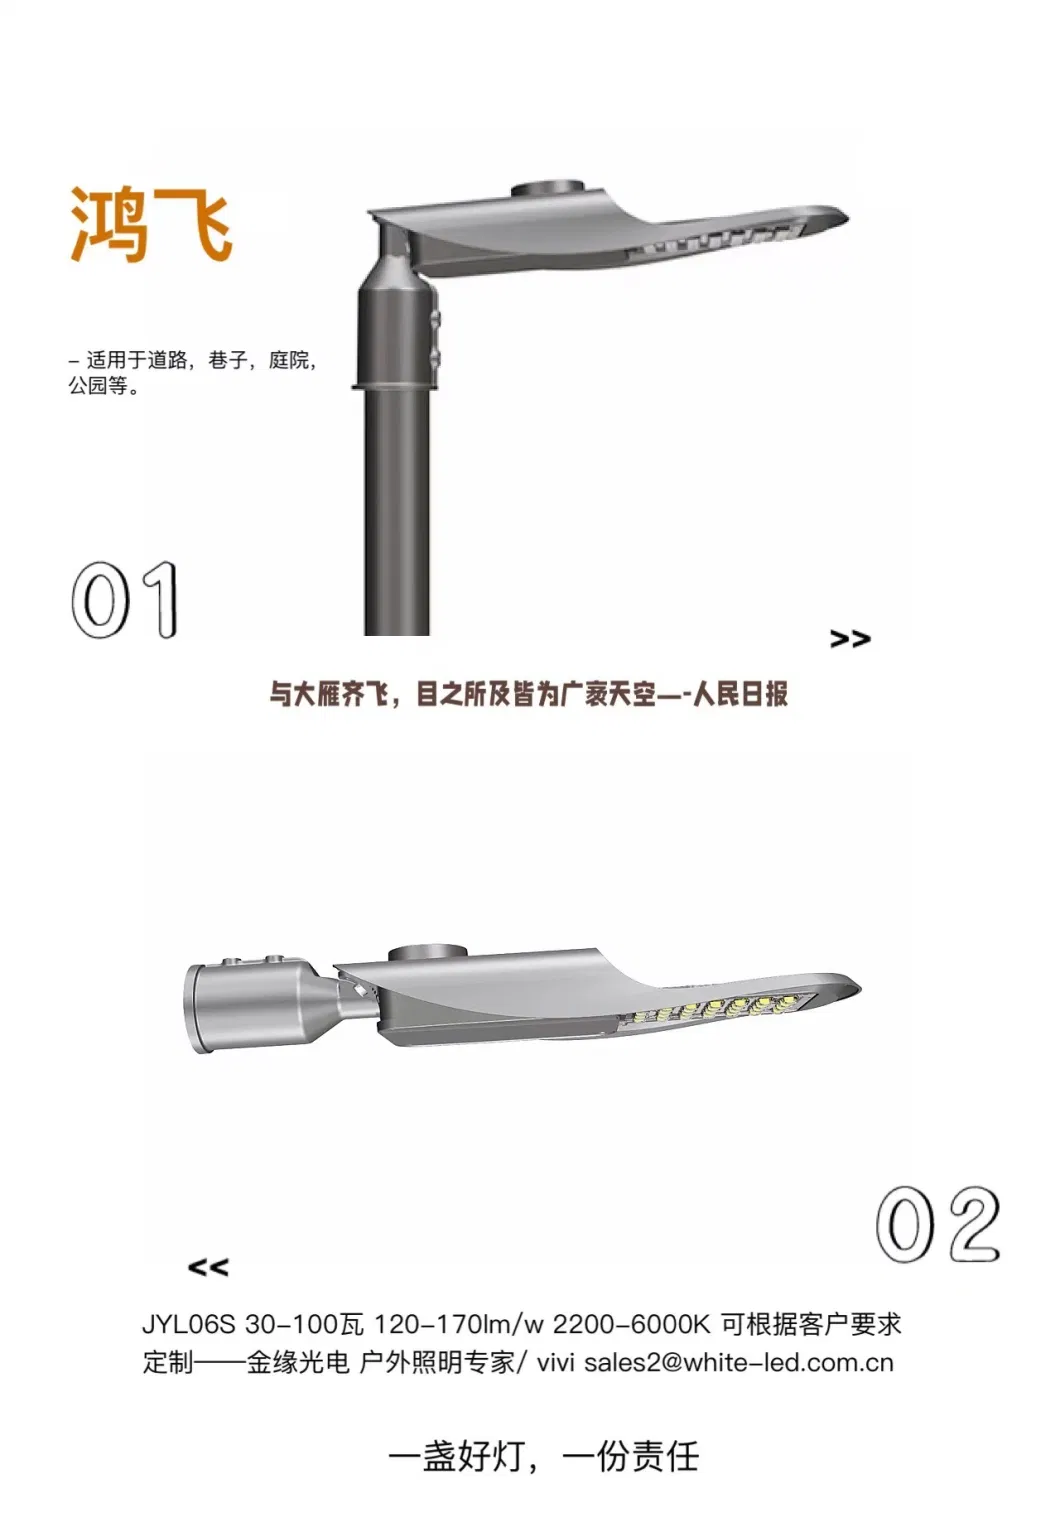 Jyl06s CKD High Light Efficiency 160-170lm/W 30-100W LED Street Lighting for Urban and Residential Area